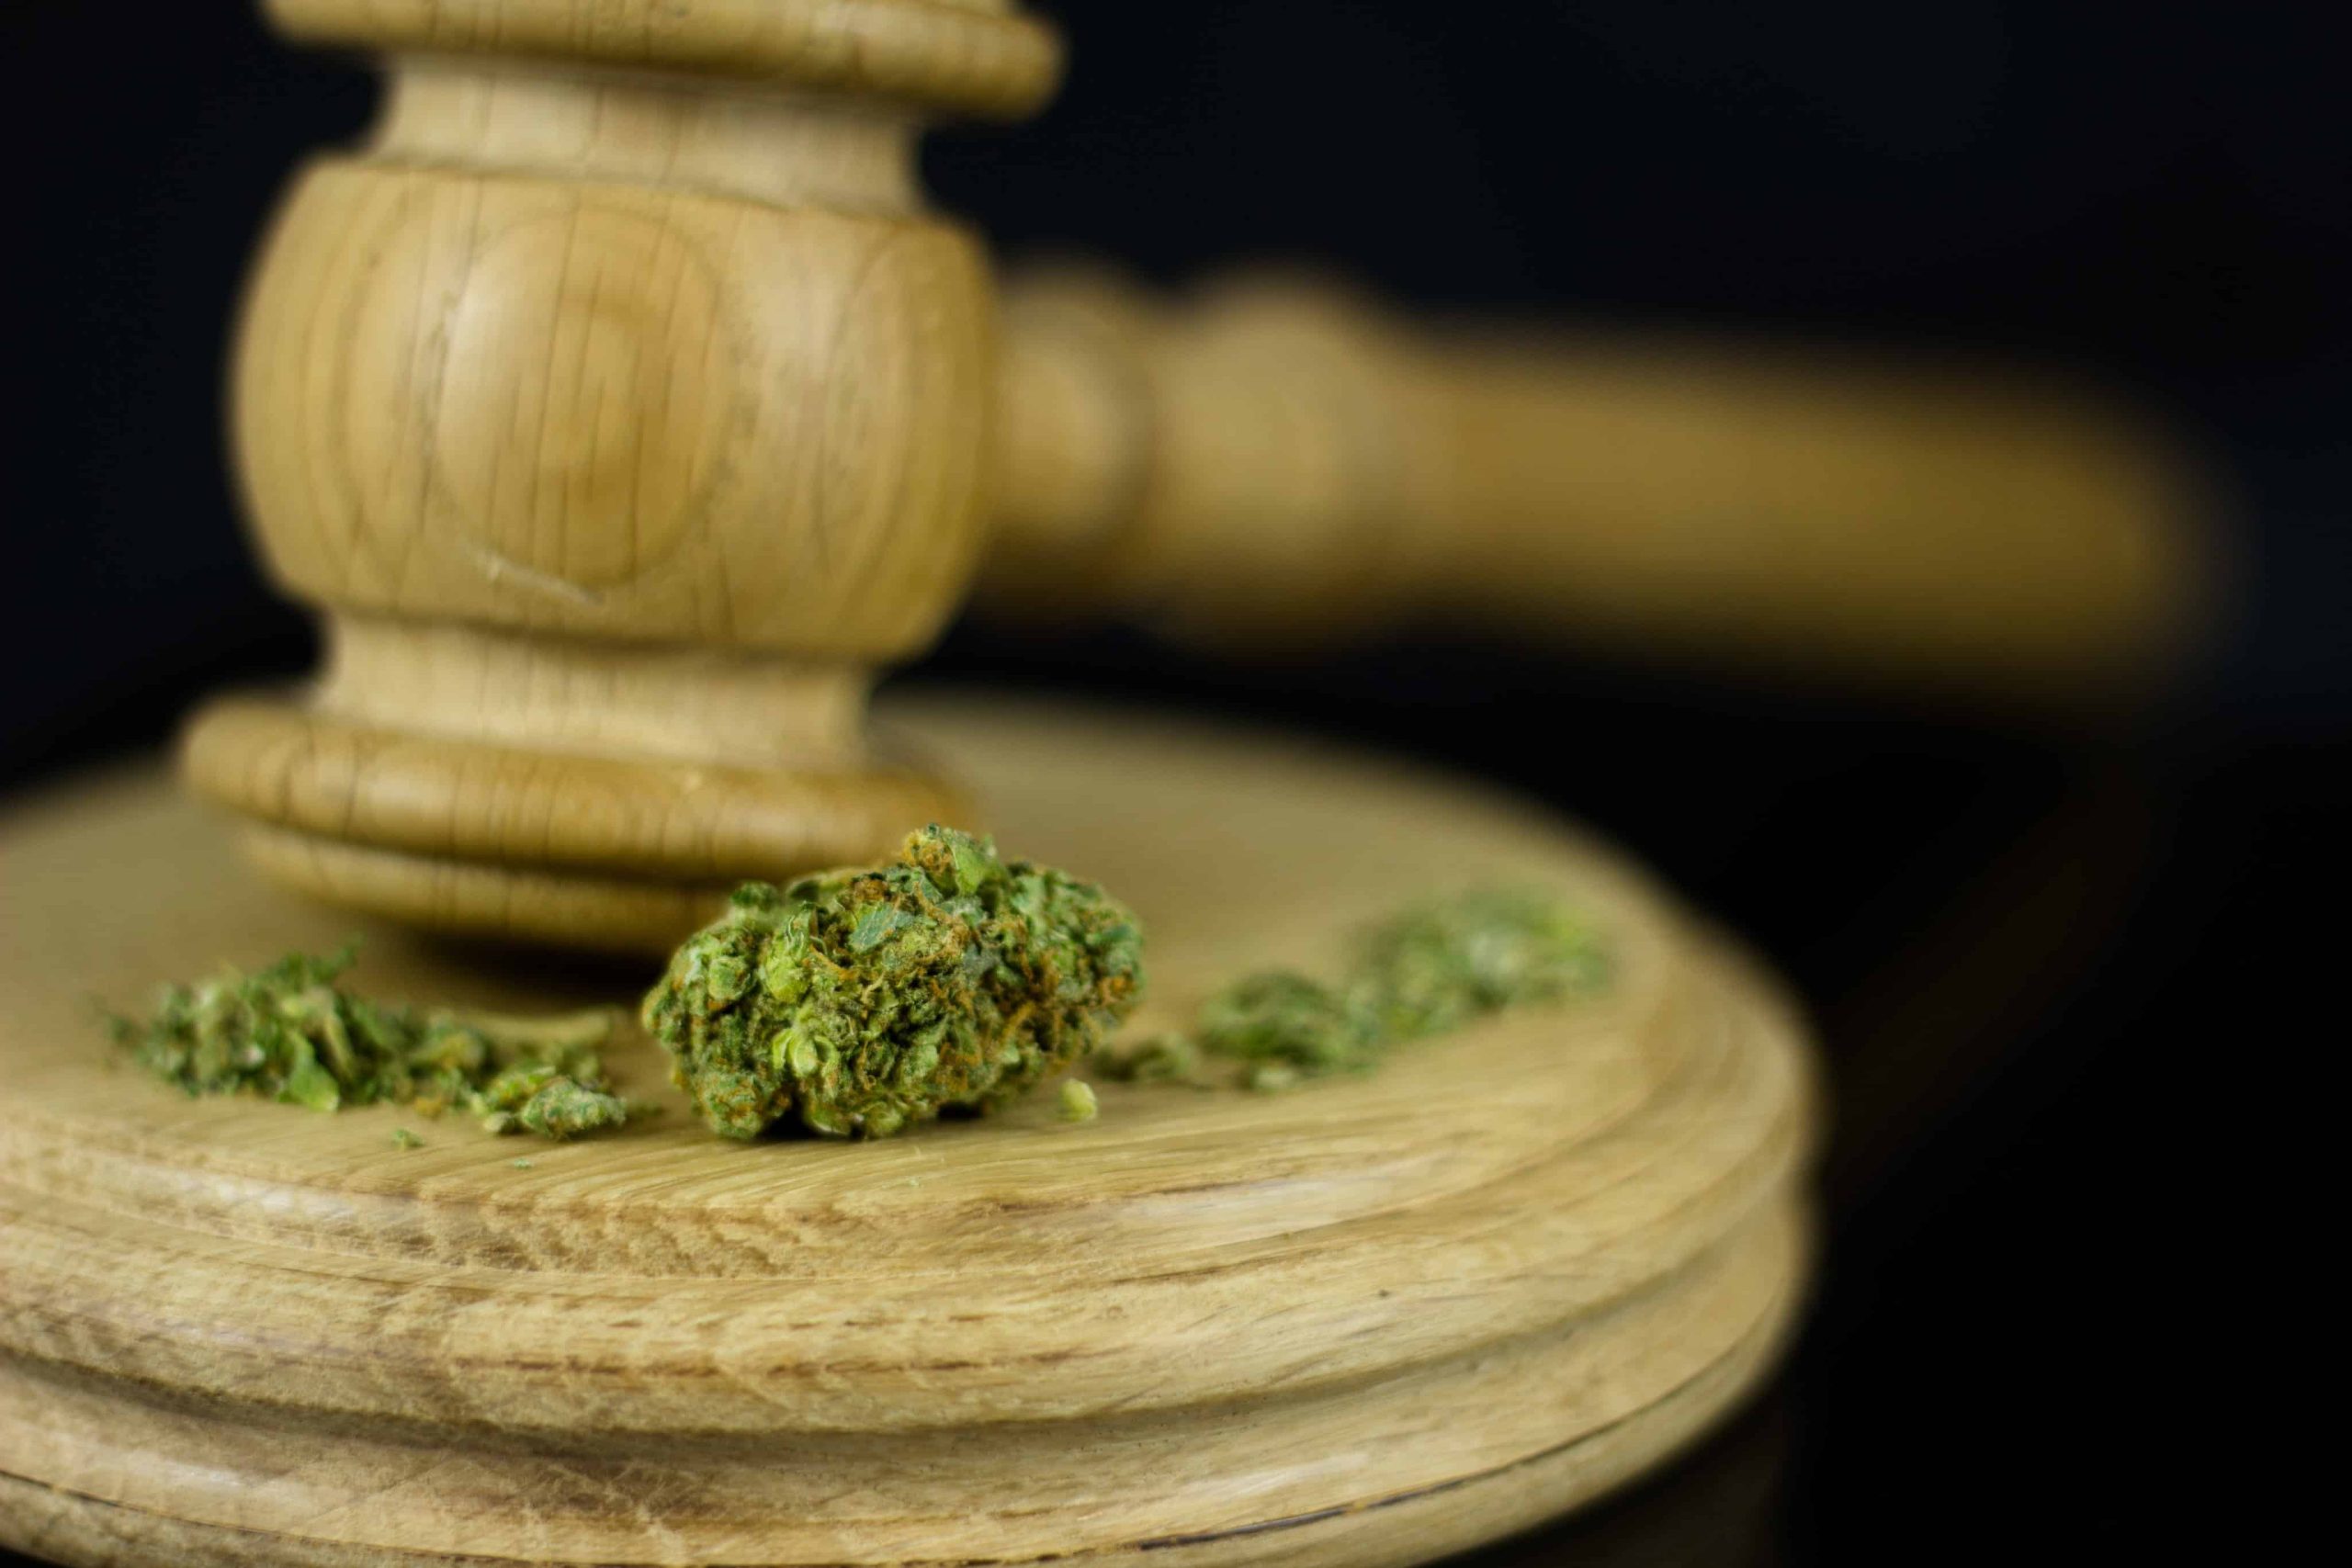 Study Finds Weed Cases Are Clogging Pennsylvania Courts